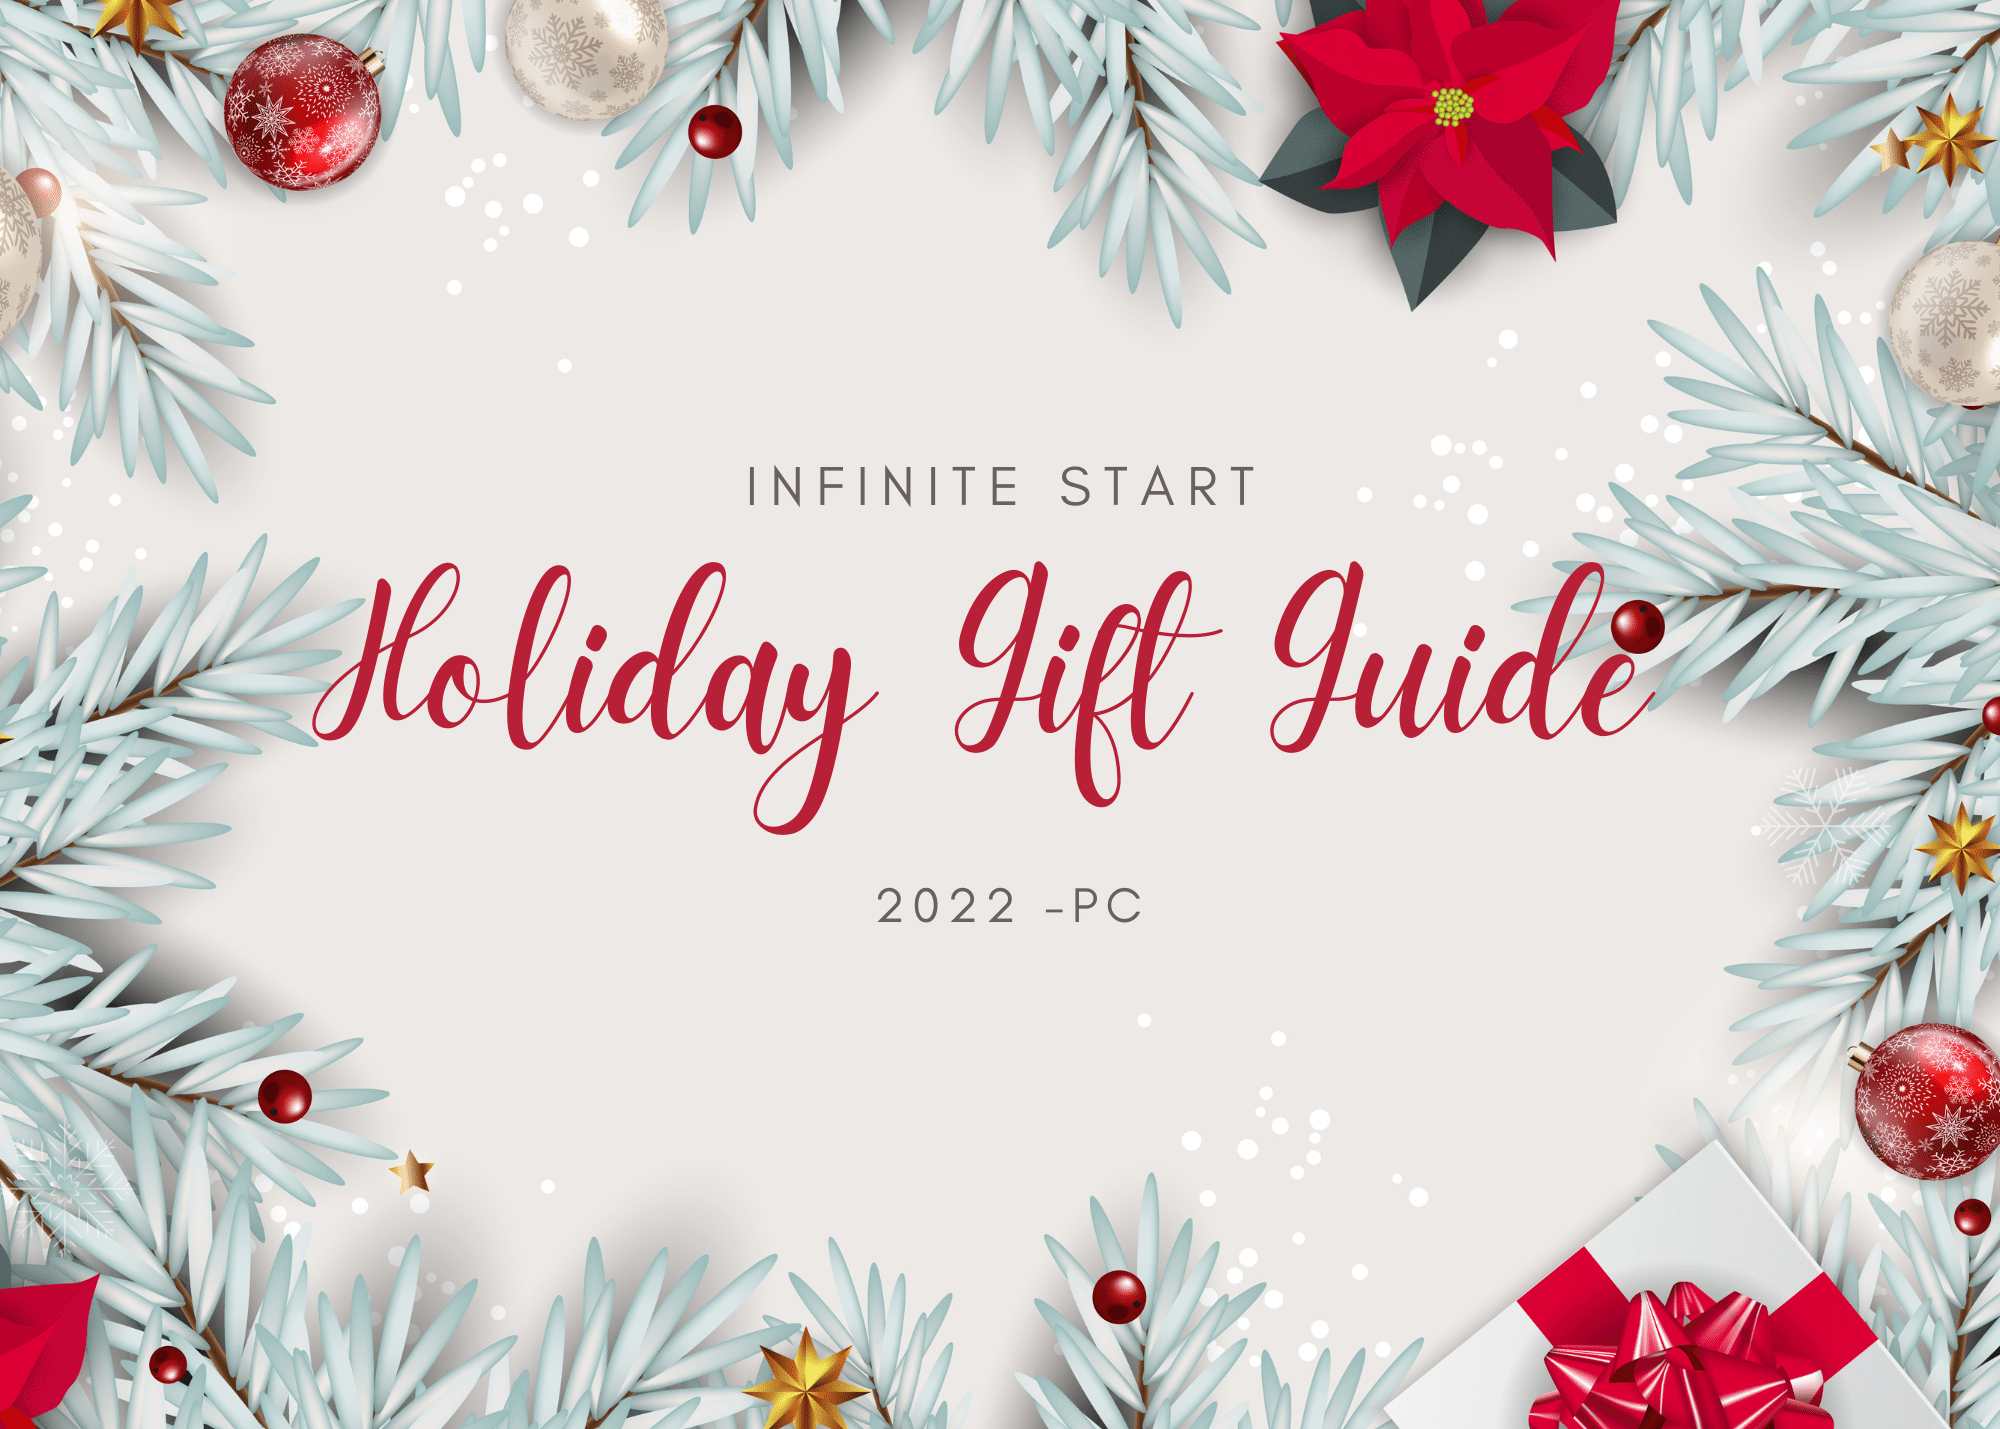 Holiday Gift Guide 2022 - PC 1